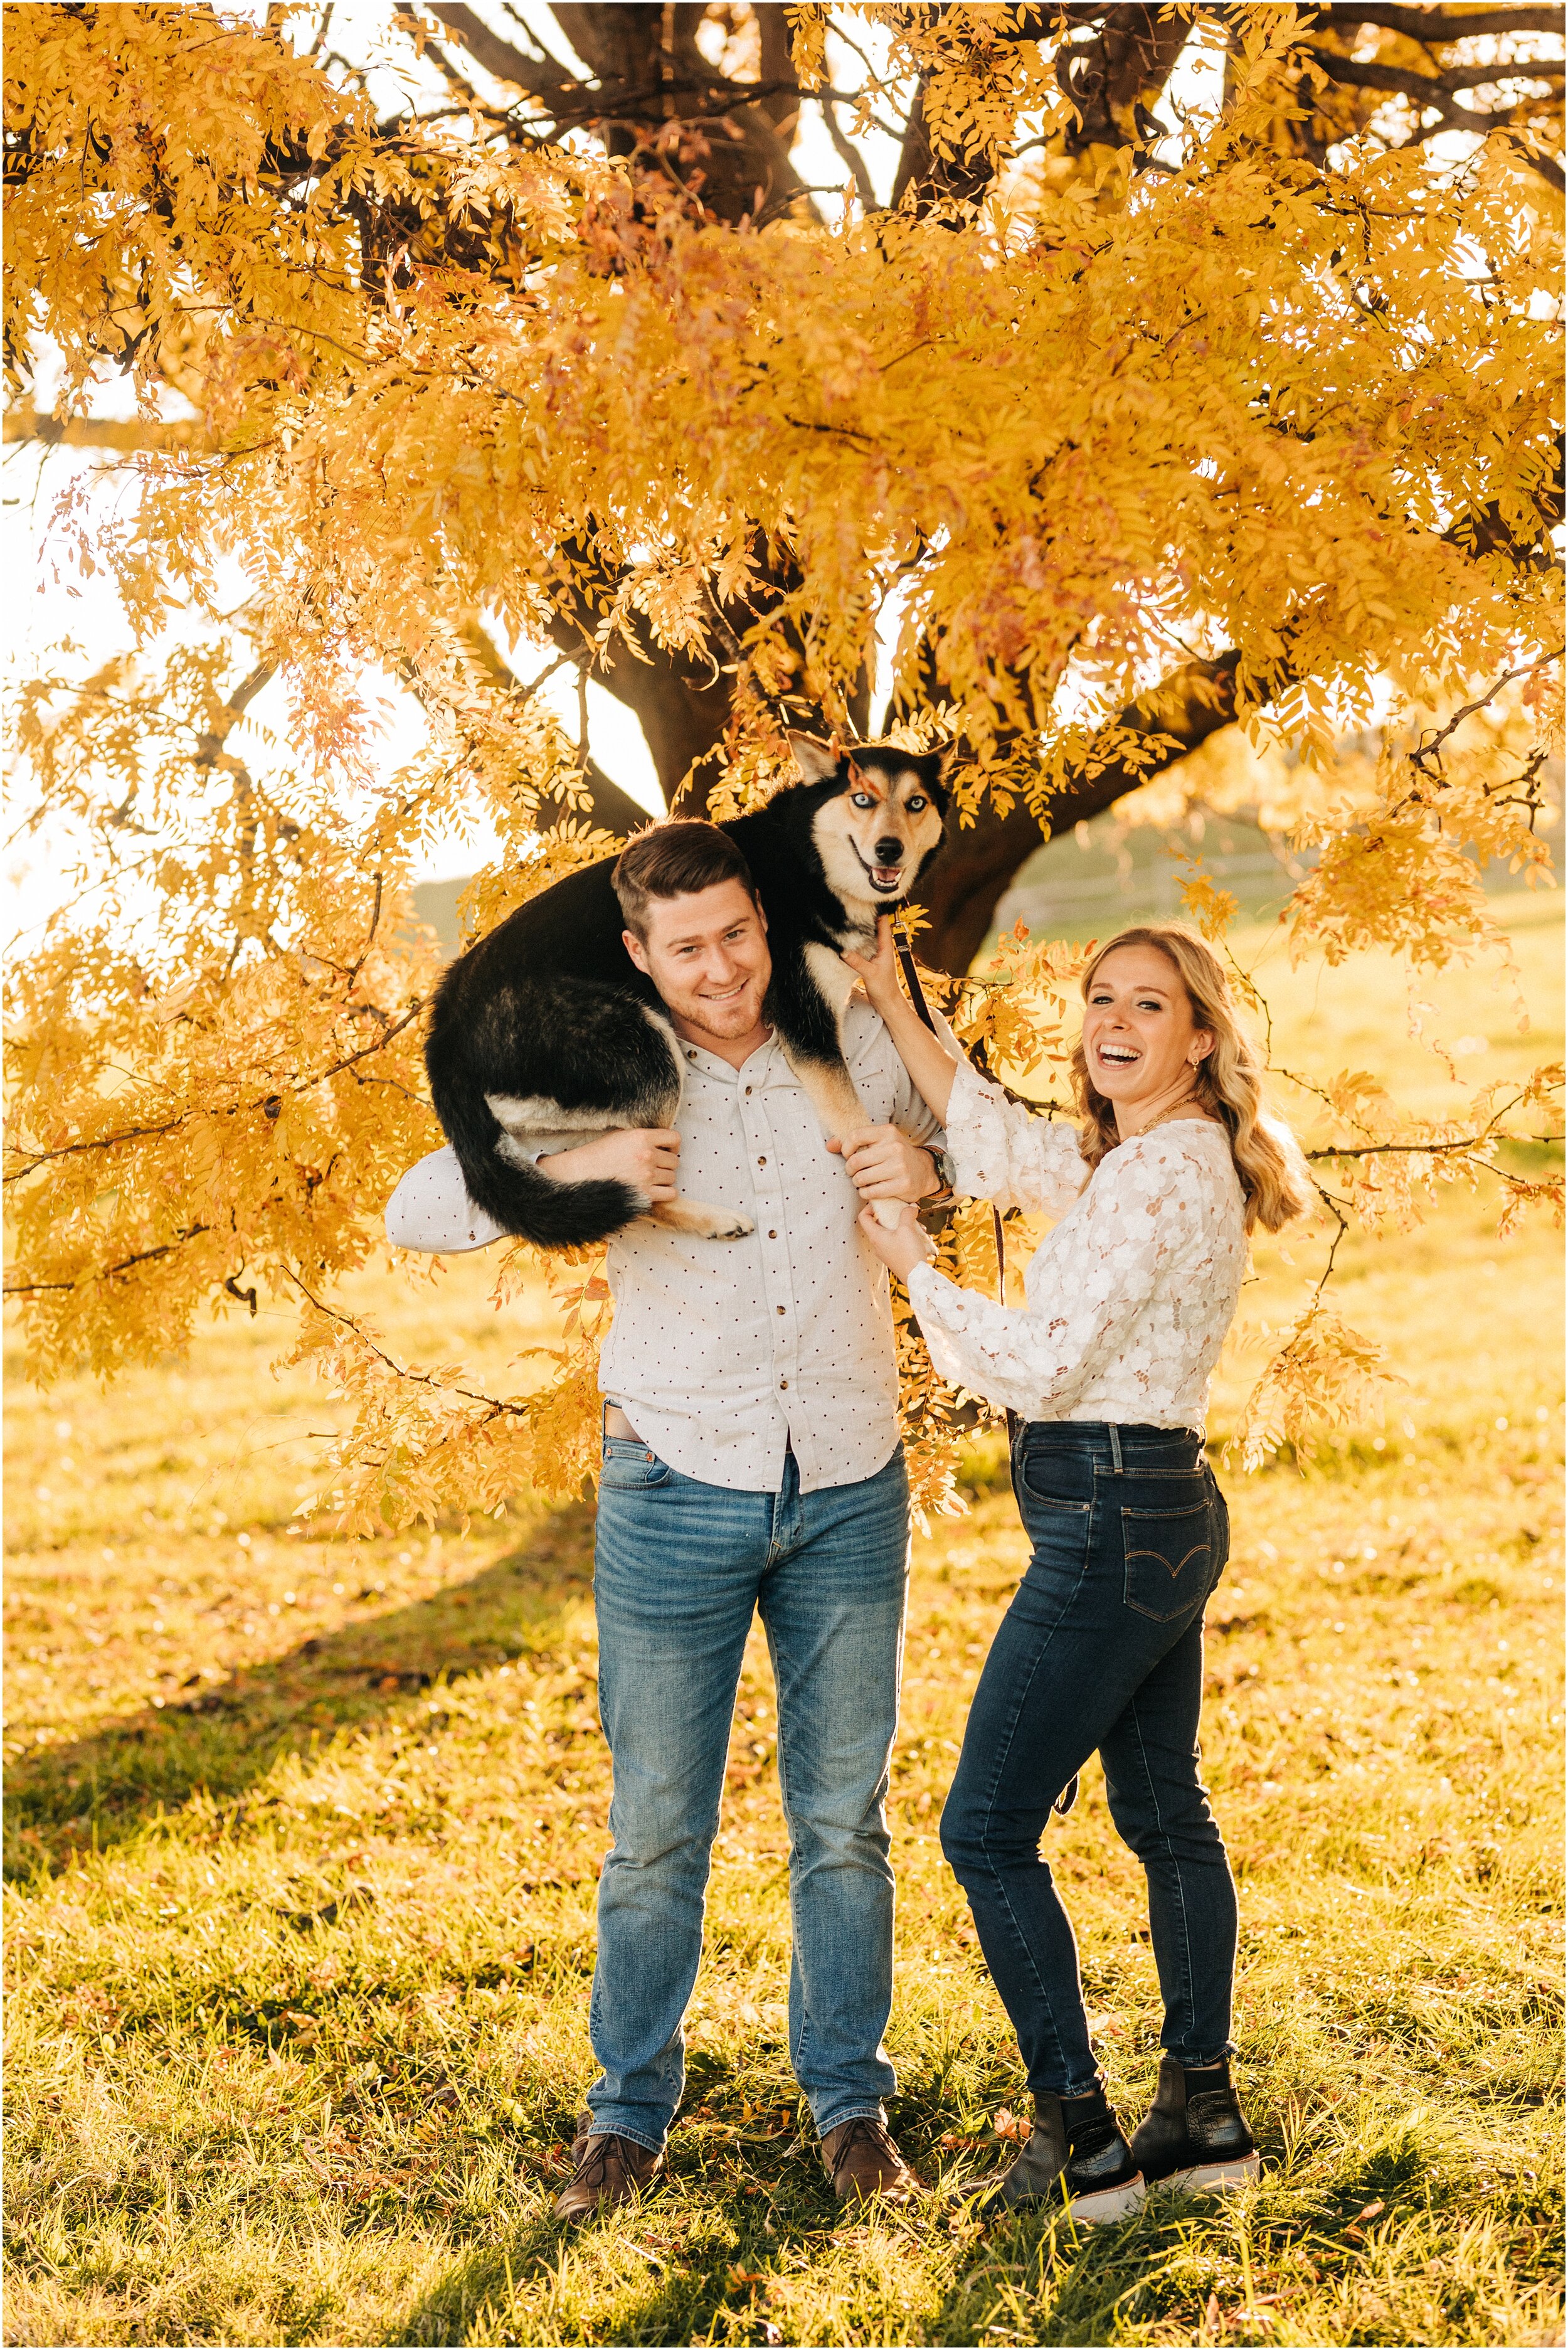 hannah leigh photography Baltimore City Maryland October Engagement Session_7063.jpg